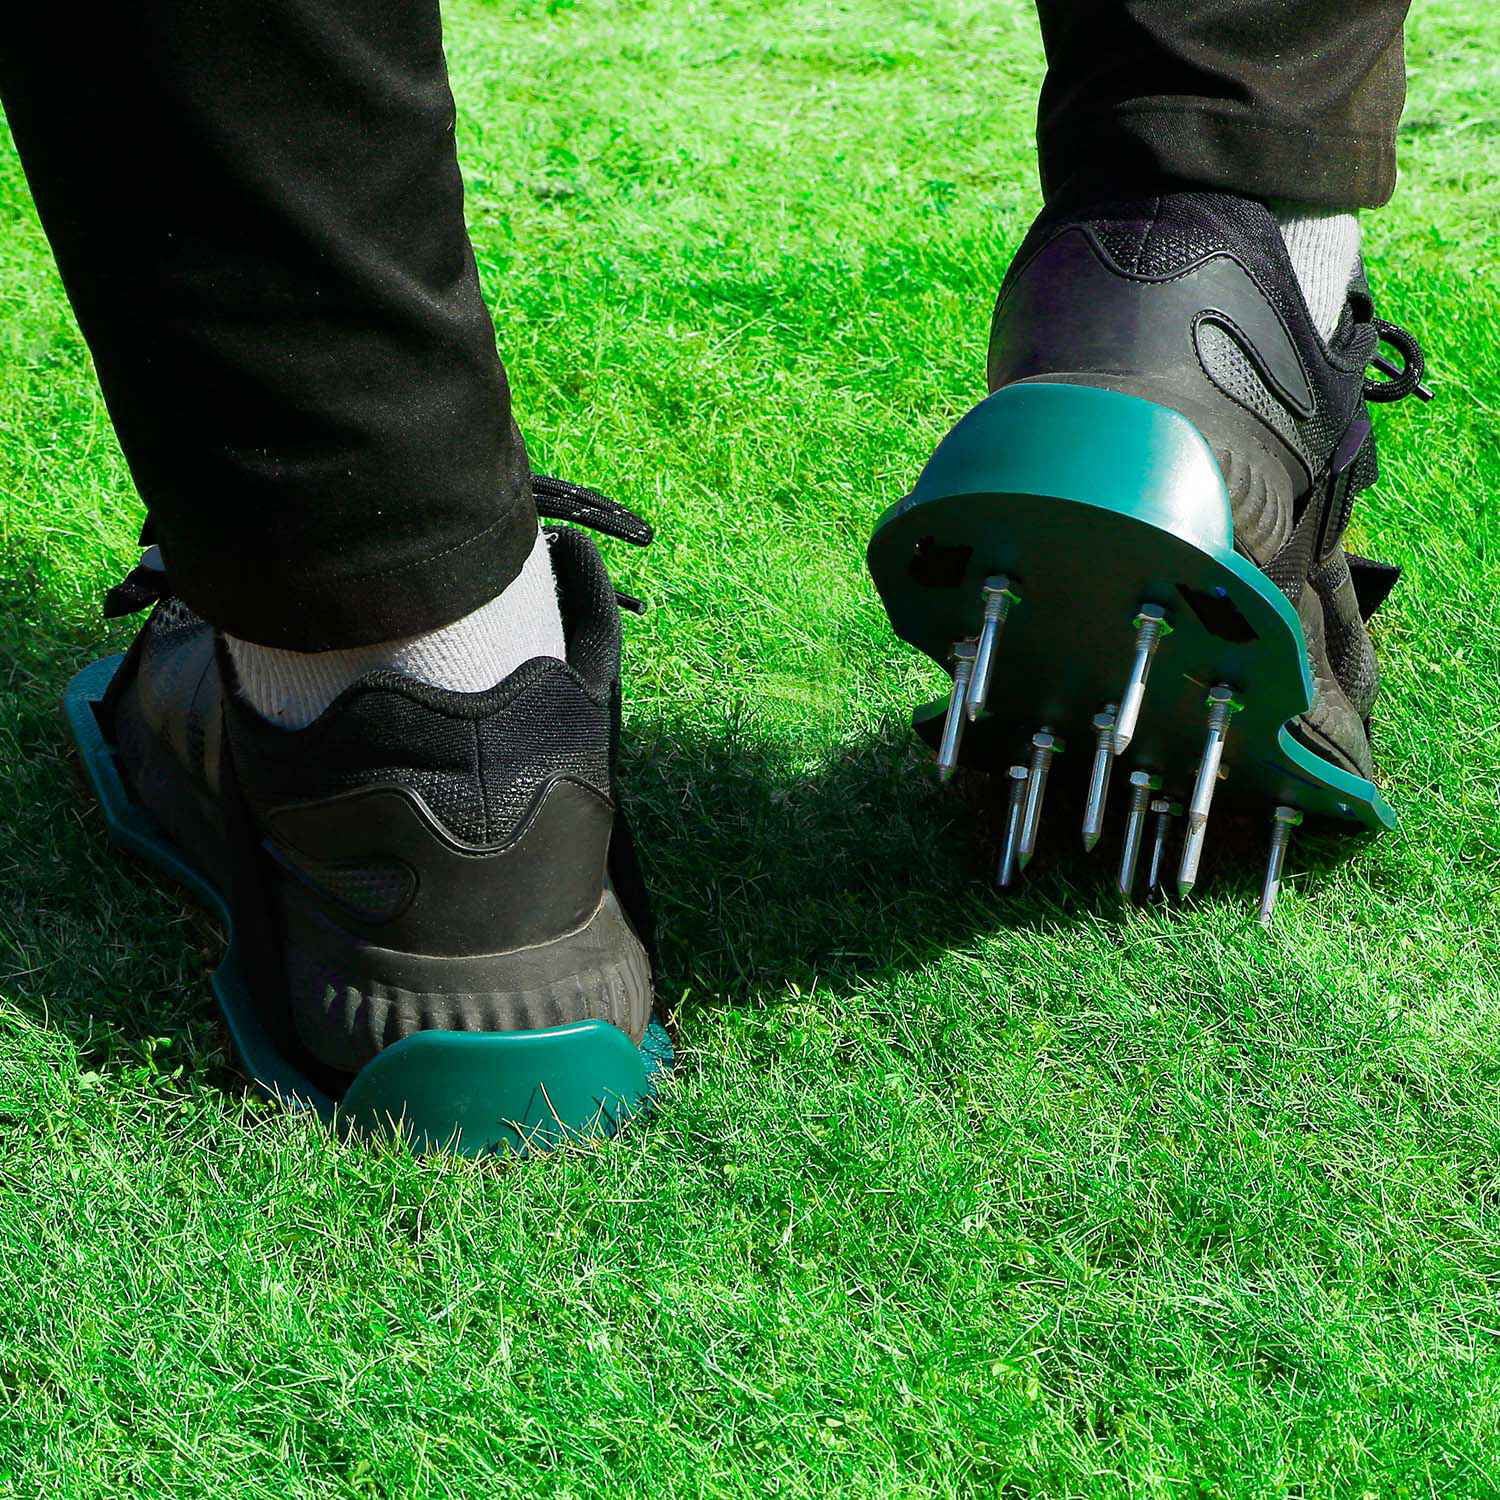 iMounTEK 1Pair Lawn Aerator Shoes Grass Aerating Spike Sandal Heavy Duty Aerator Shoes w/ Adjustable Straps for Lawn Garden